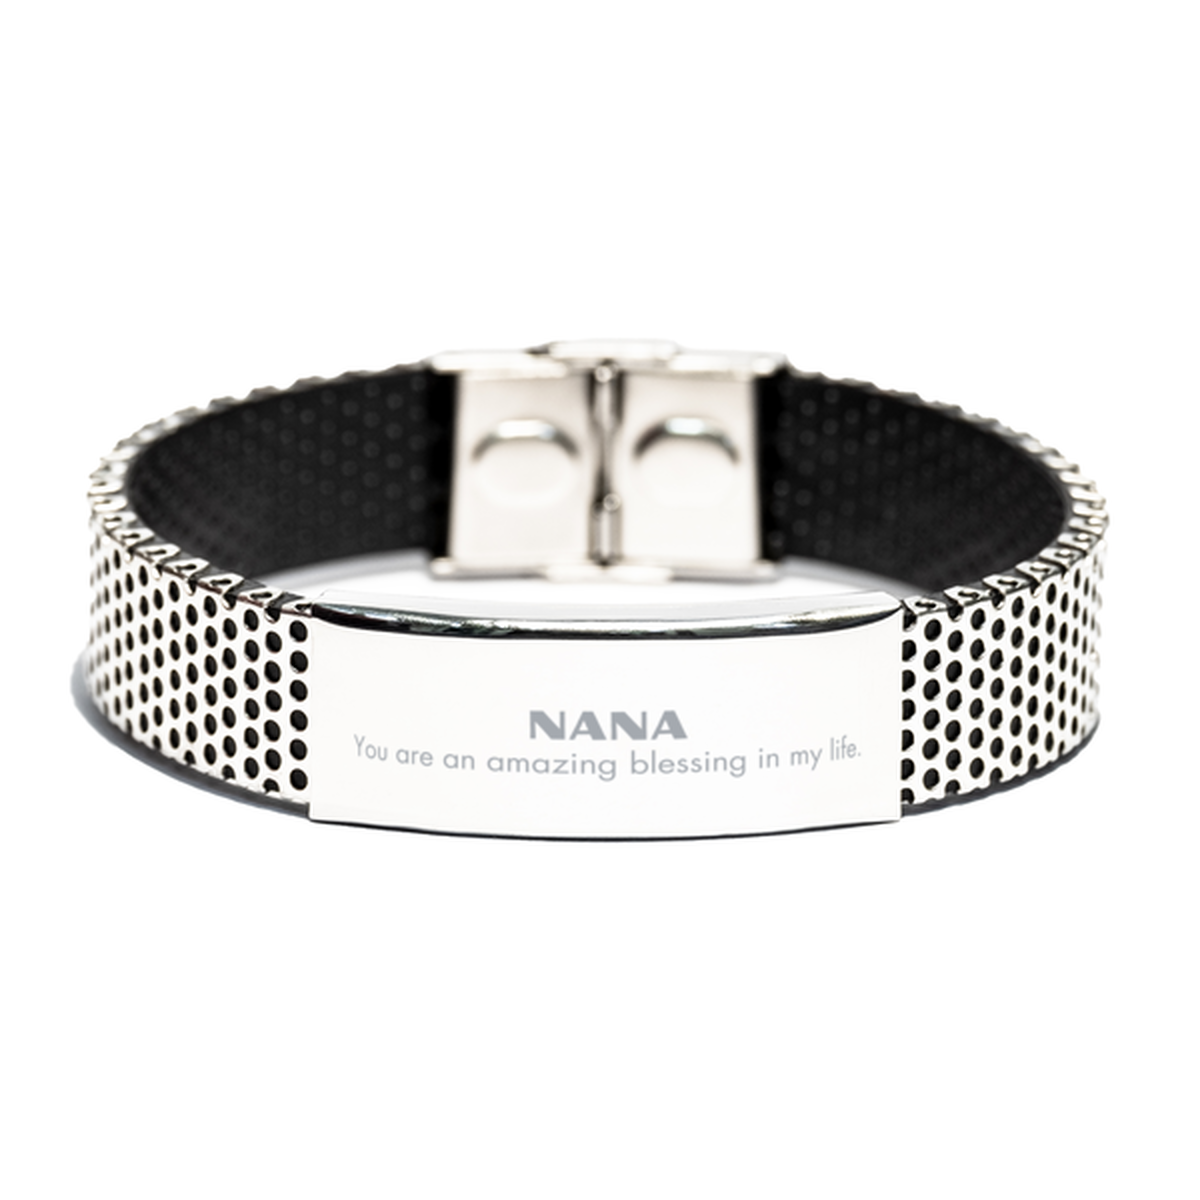 Nana Stainless Steel Bracelet, You are an amazing blessing in my life, Thank You Gifts For Nana, Inspirational Birthday Christmas Unique Gifts For Nana